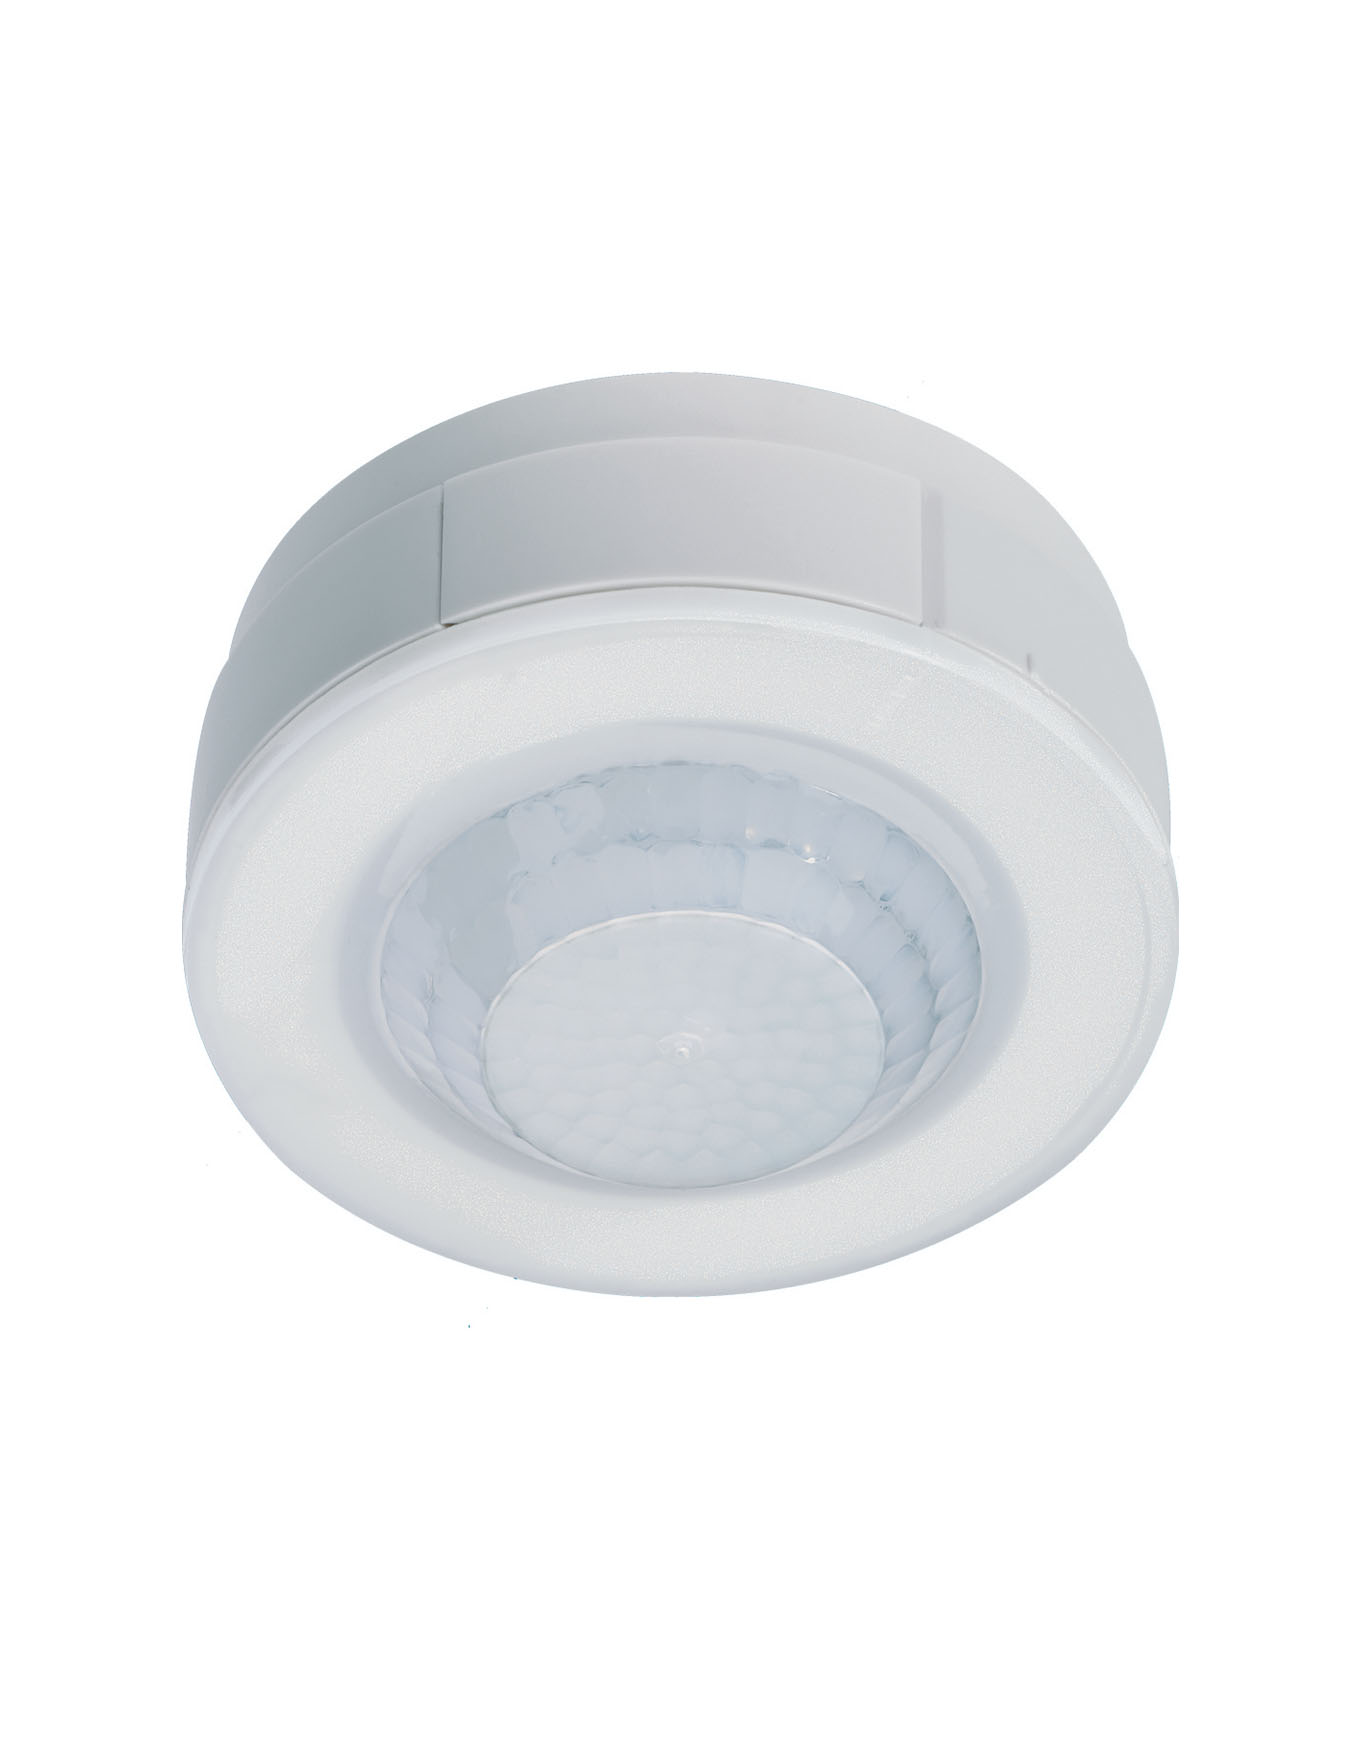 2-in-1 motion and presence detectors